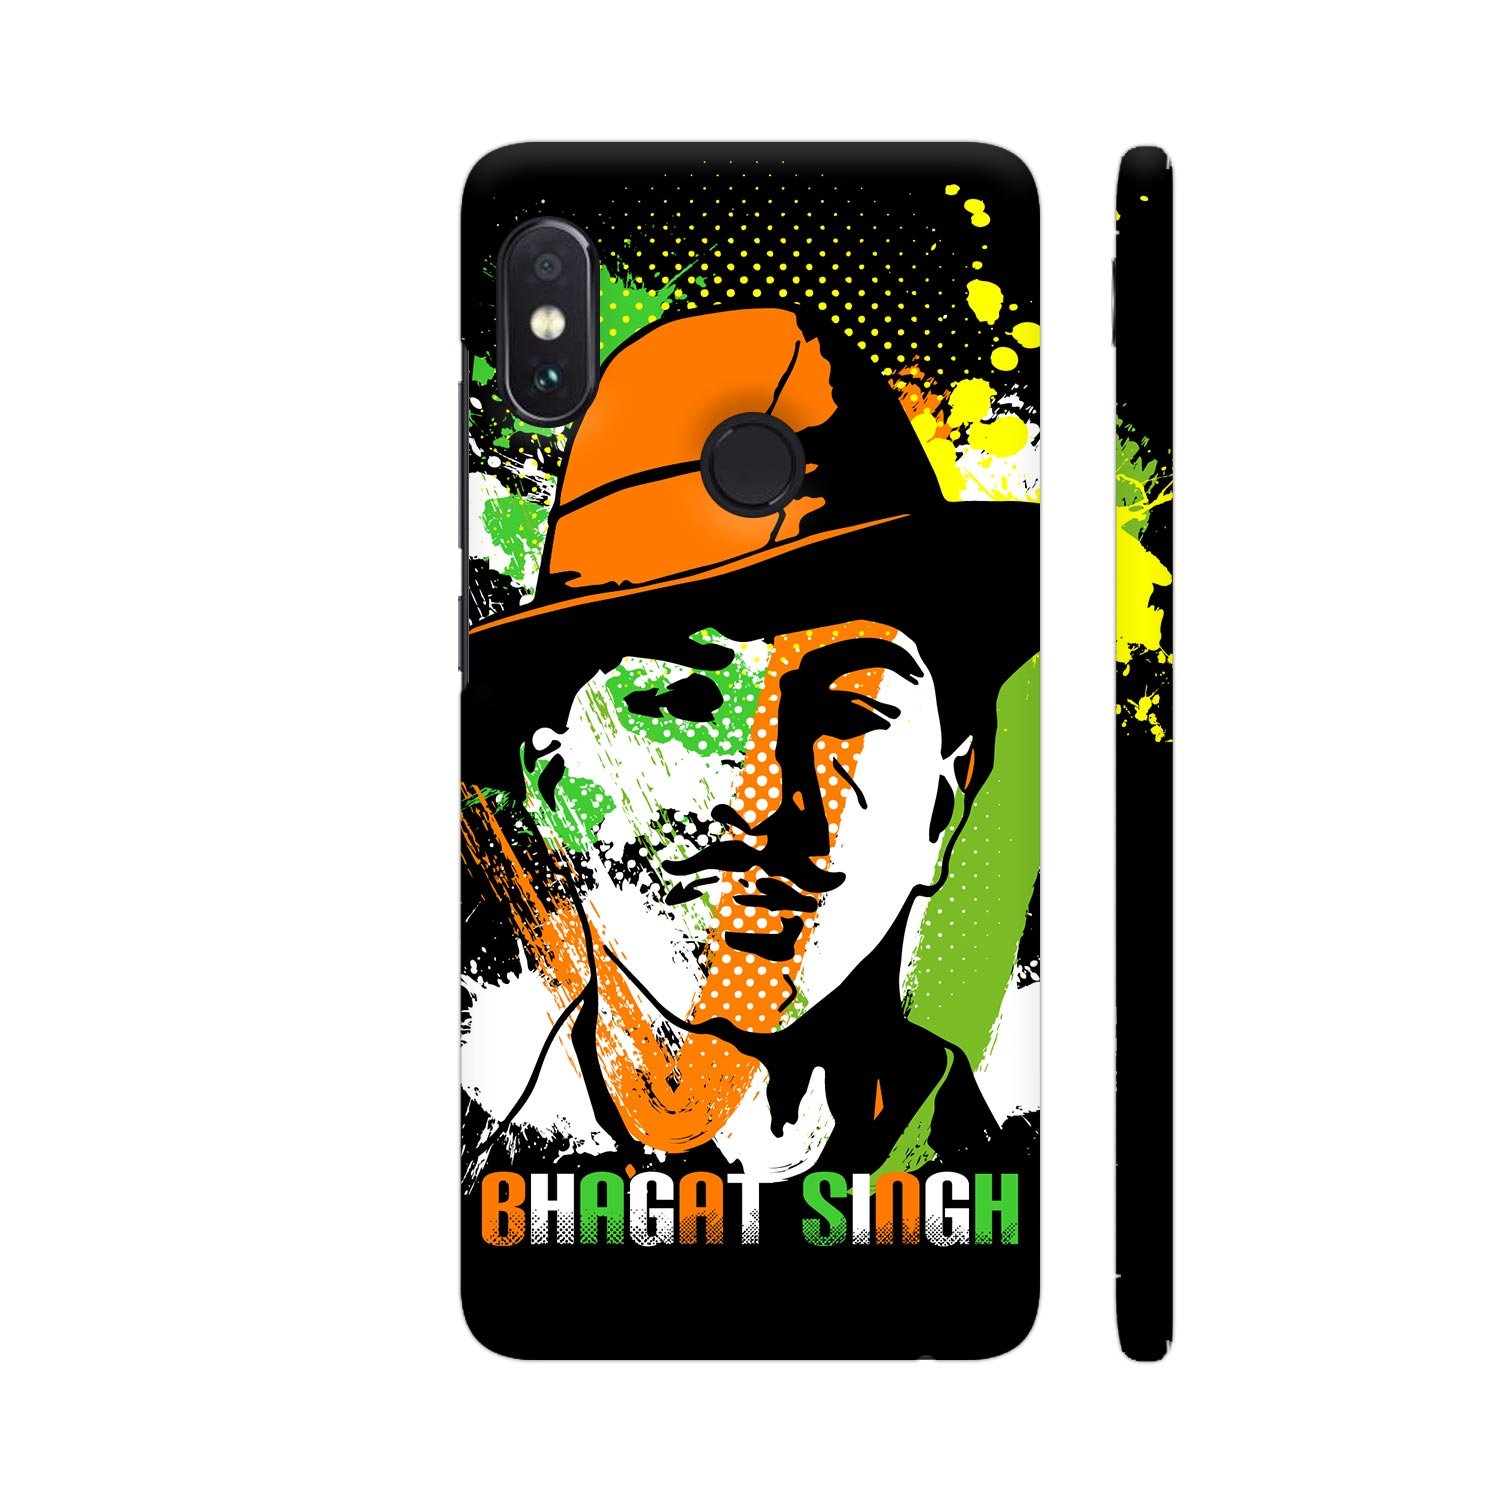 Colorpur Bhagat Singh Painting On Black Printed Back - All India Youth Federation - HD Wallpaper 